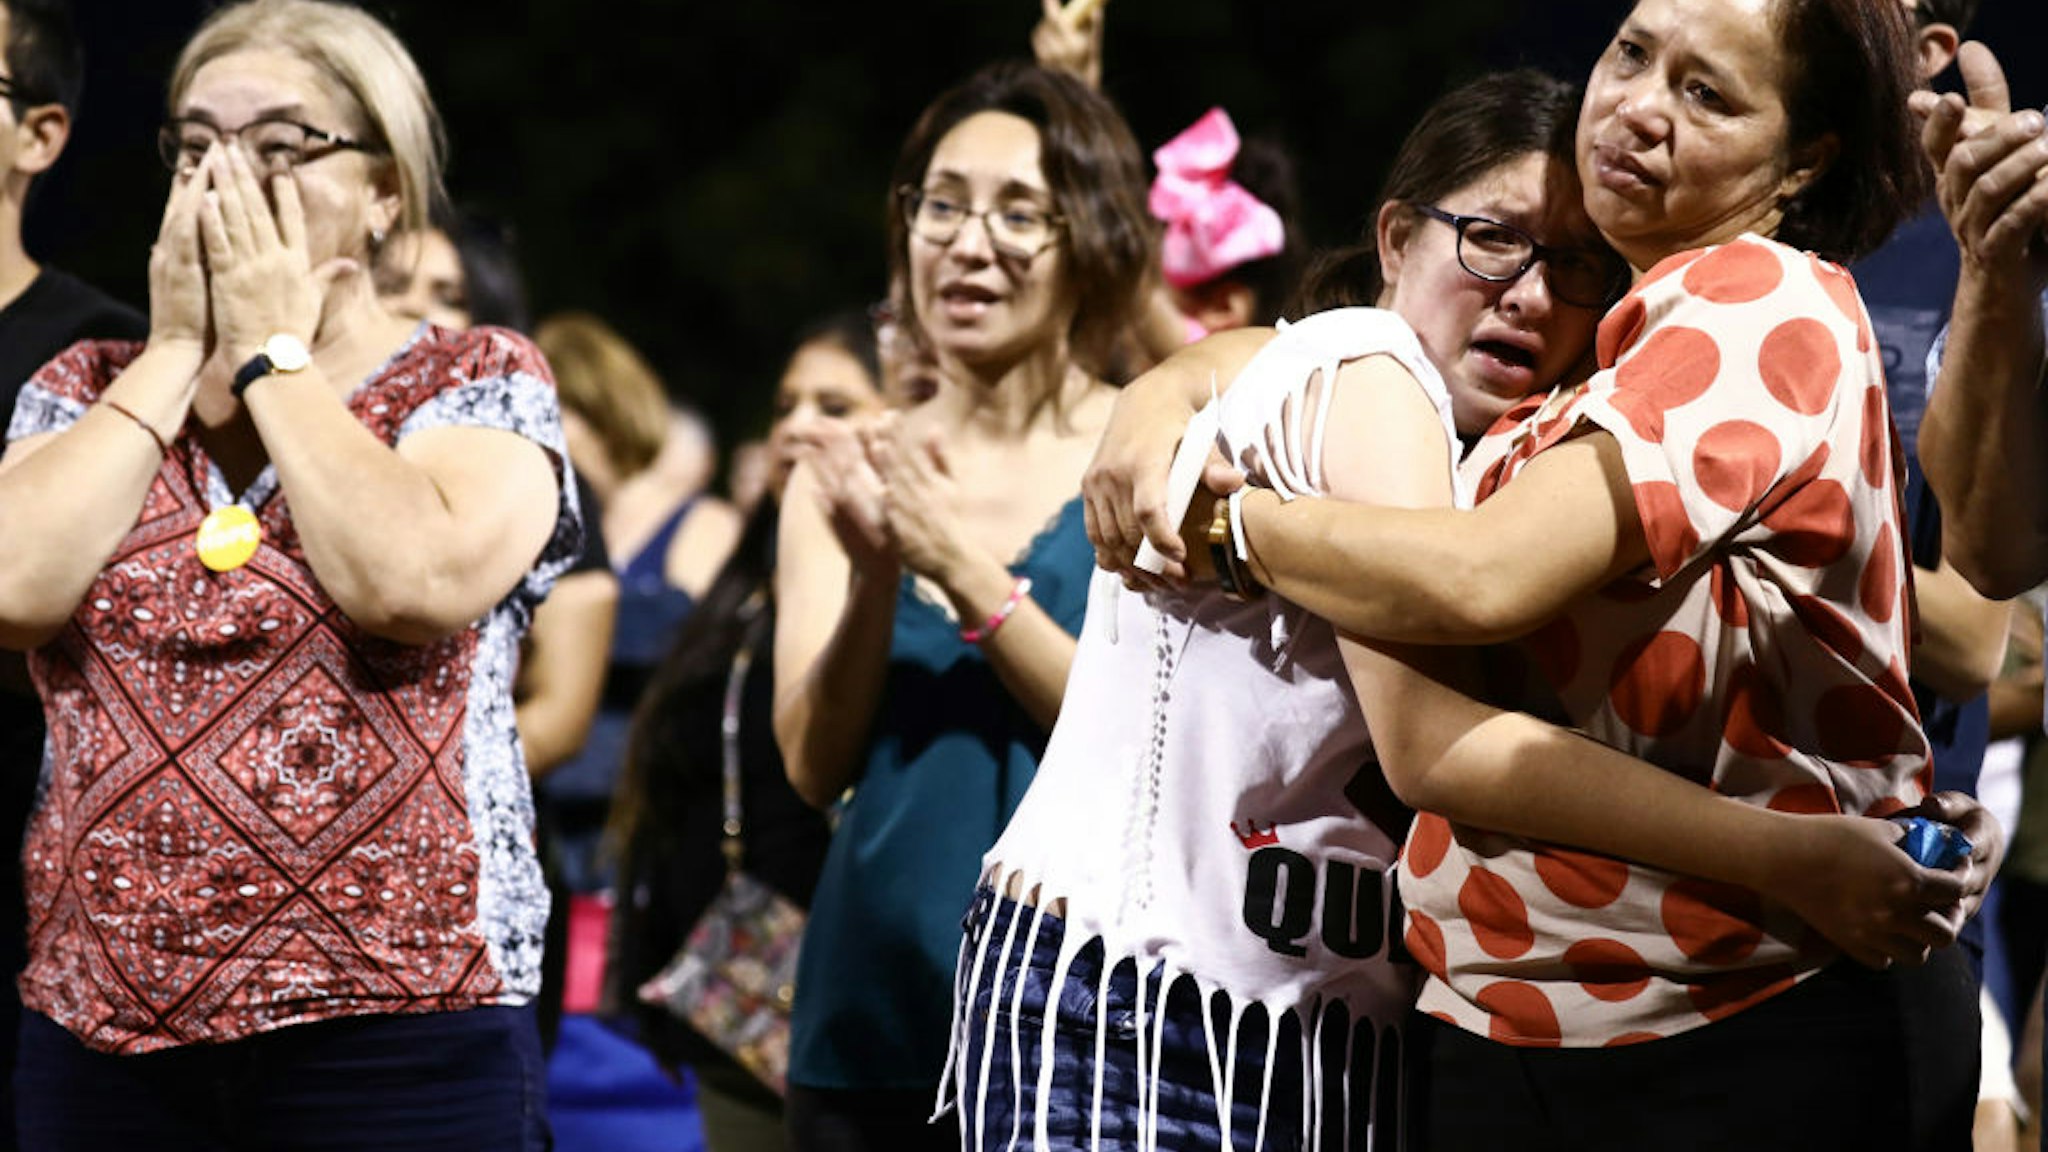 EL PASO, TEXAS - AUGUST 04: People react and embrace each other during an interfaith vigil for victims of a mass shooting which left at least 20 people dead, on August 4, 2019 in El Paso, Texas. A 21-year-old male suspect was taken into custody in the city which sits along the U.S.-Mexico border. At least 26 people were wounded.